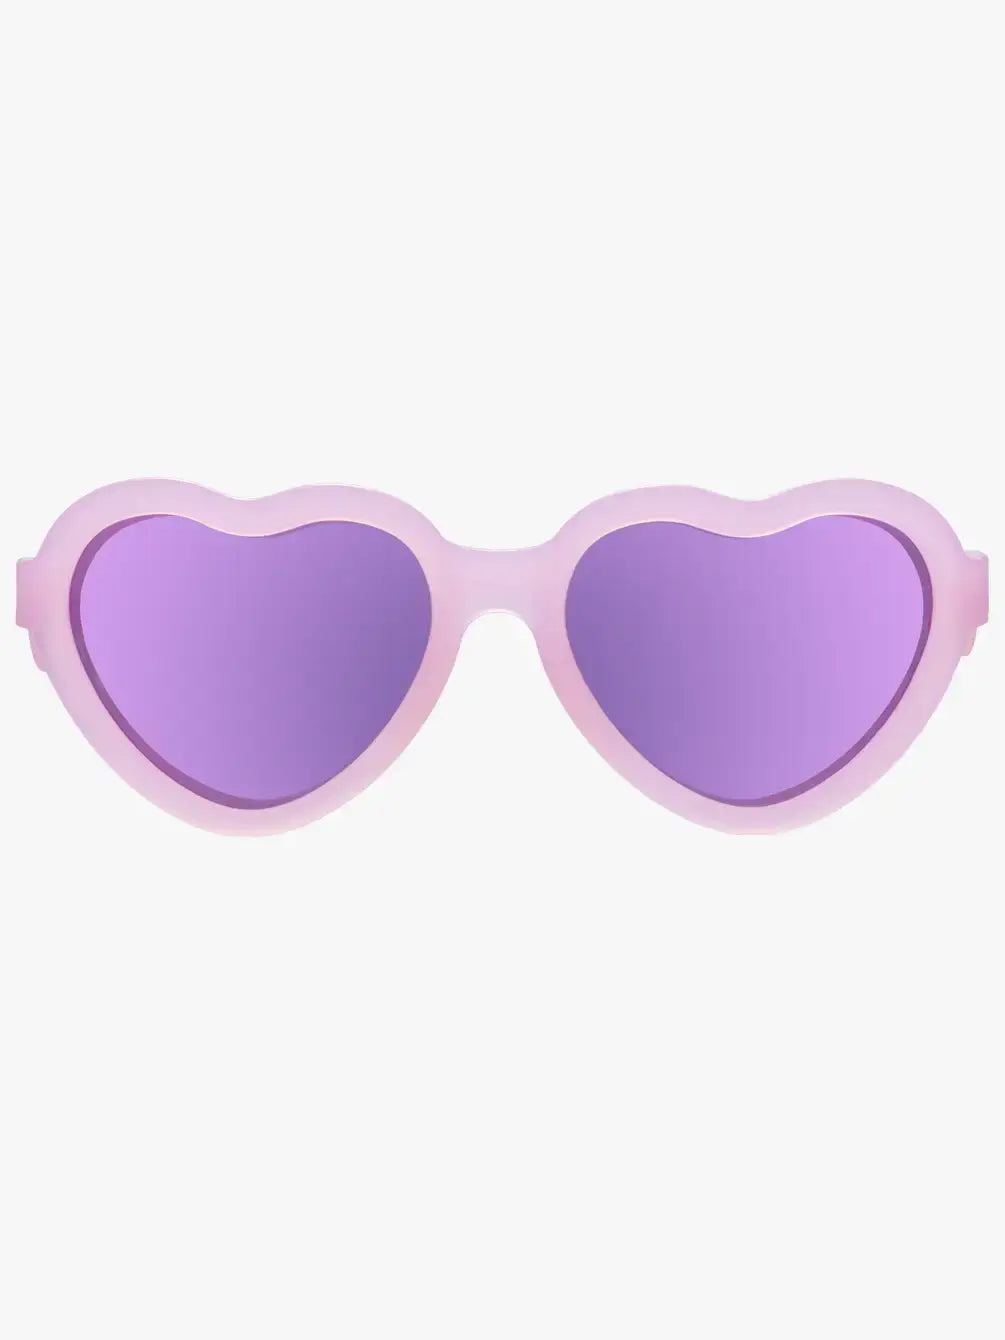 Babiators Heart Shaped Frosted Pink | Purple Mirrored Lens